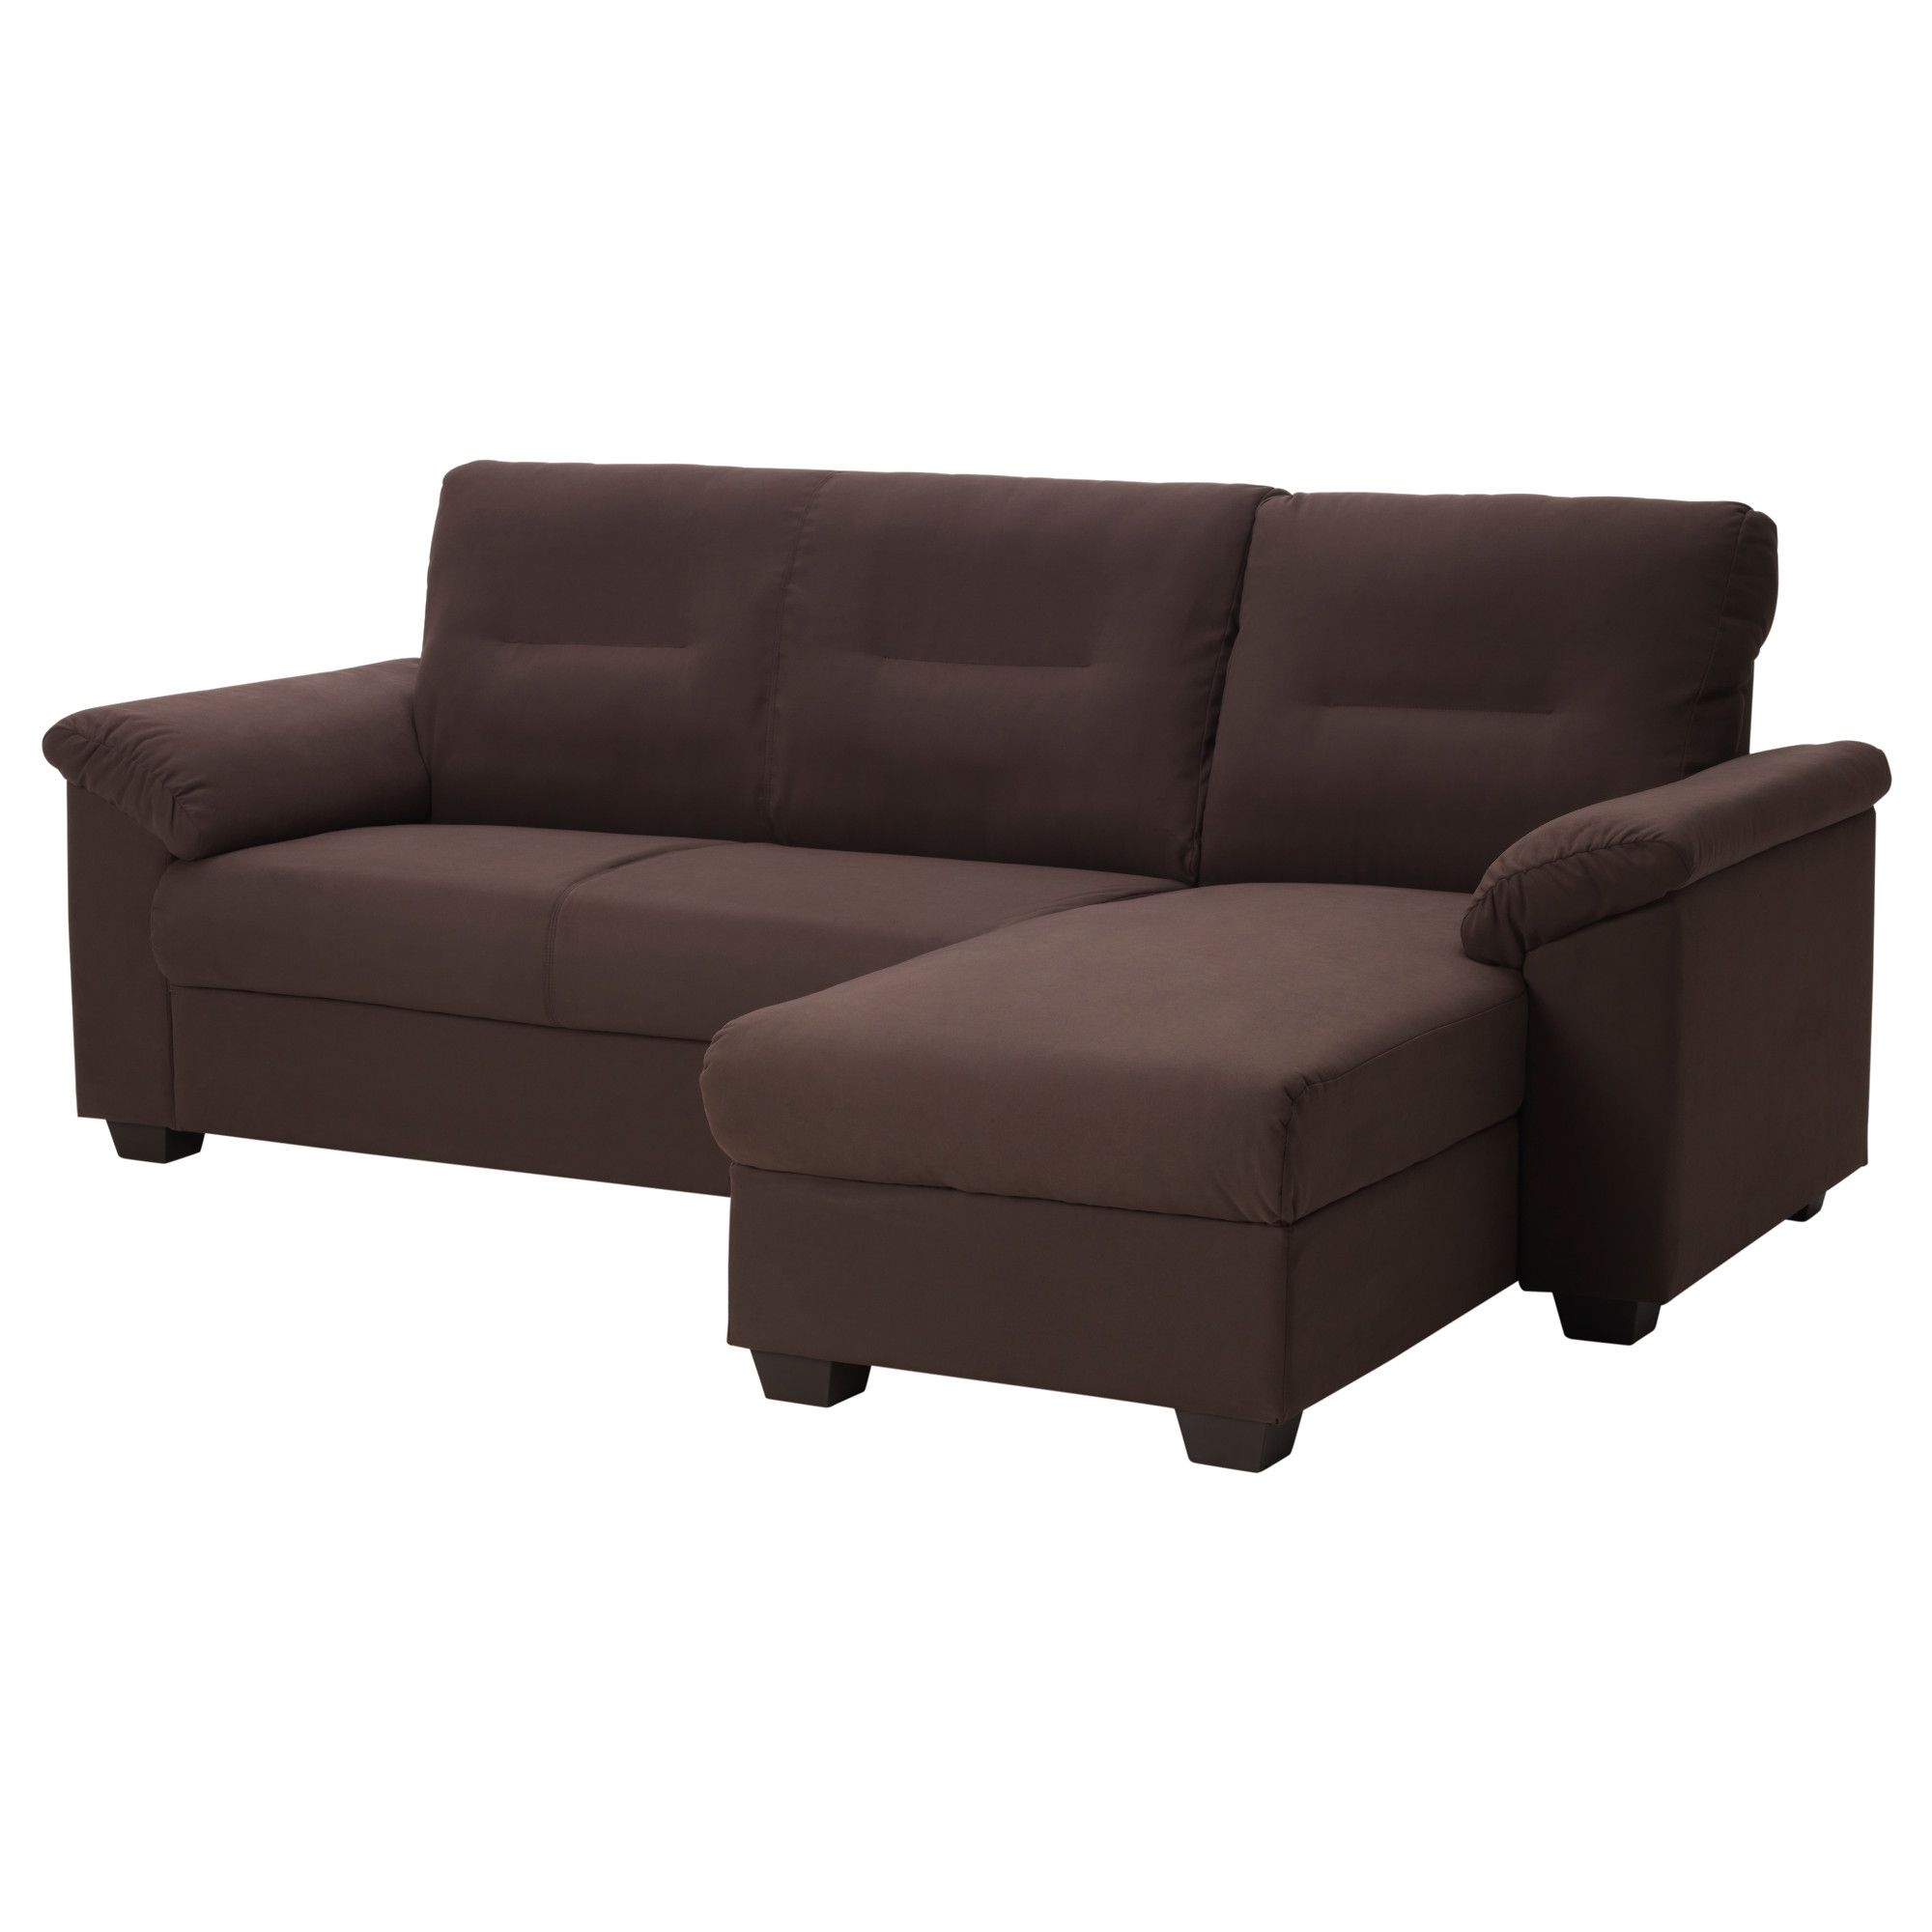 Obtuse Angle Sectional Sofa Rs Gold Sofa With Regard To 45 Degree Sectional Sofa (View 10 of 15)